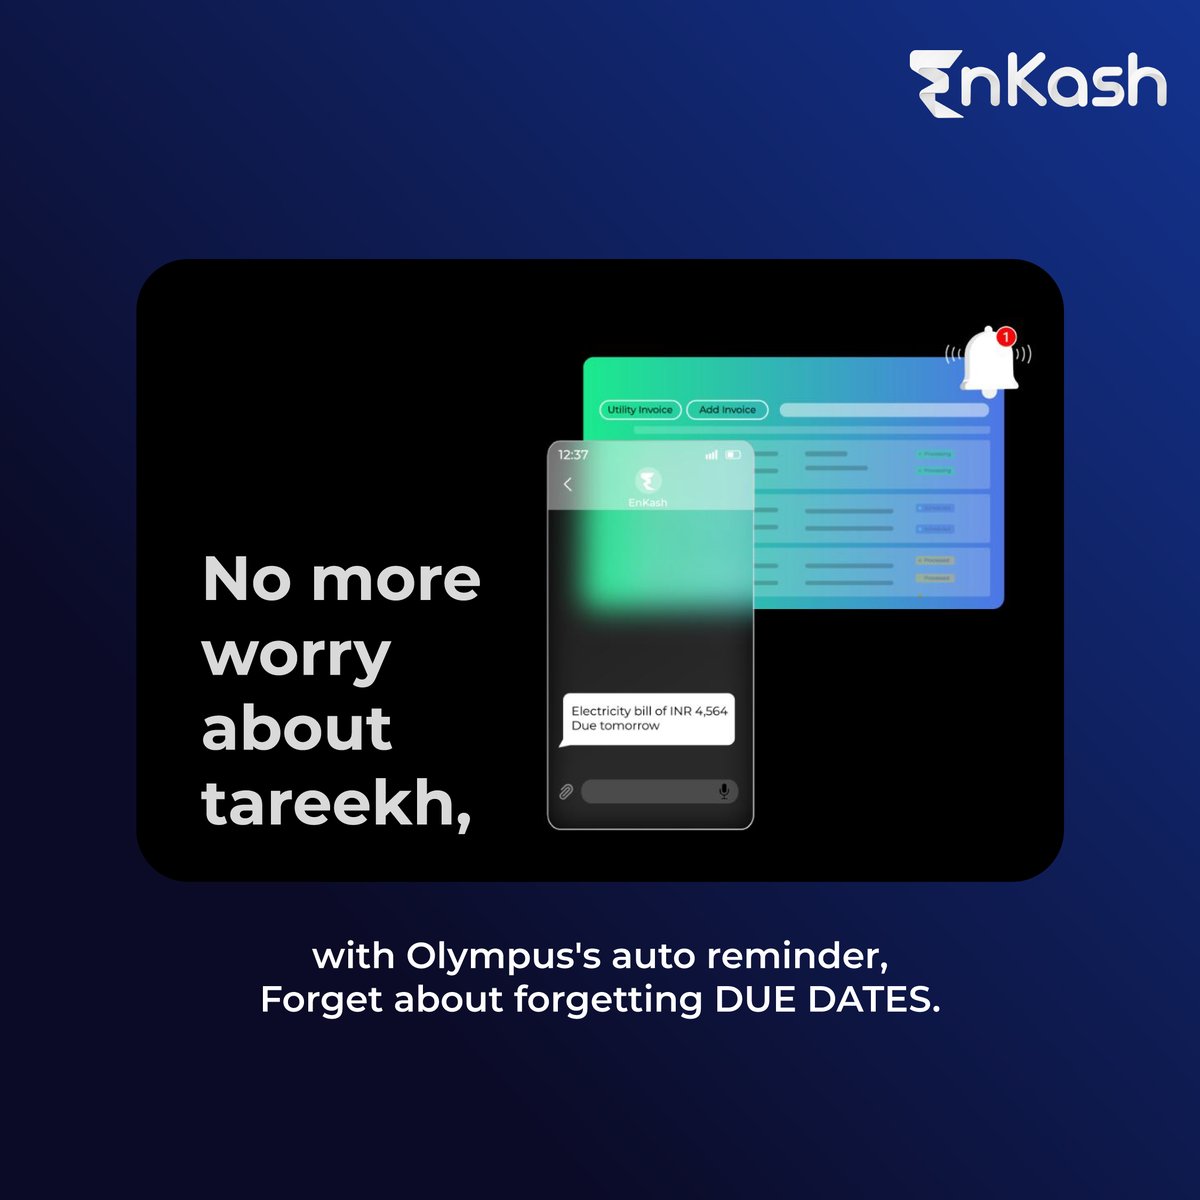 Stay on Top of your Finances with Olympus's Auto Reminder: Never Miss a Deadline Again!

#EnKash #Olympus #payments #corporatecards #spendmanagement #reminders #sunnydeol #bollywood #meme #nostalgia